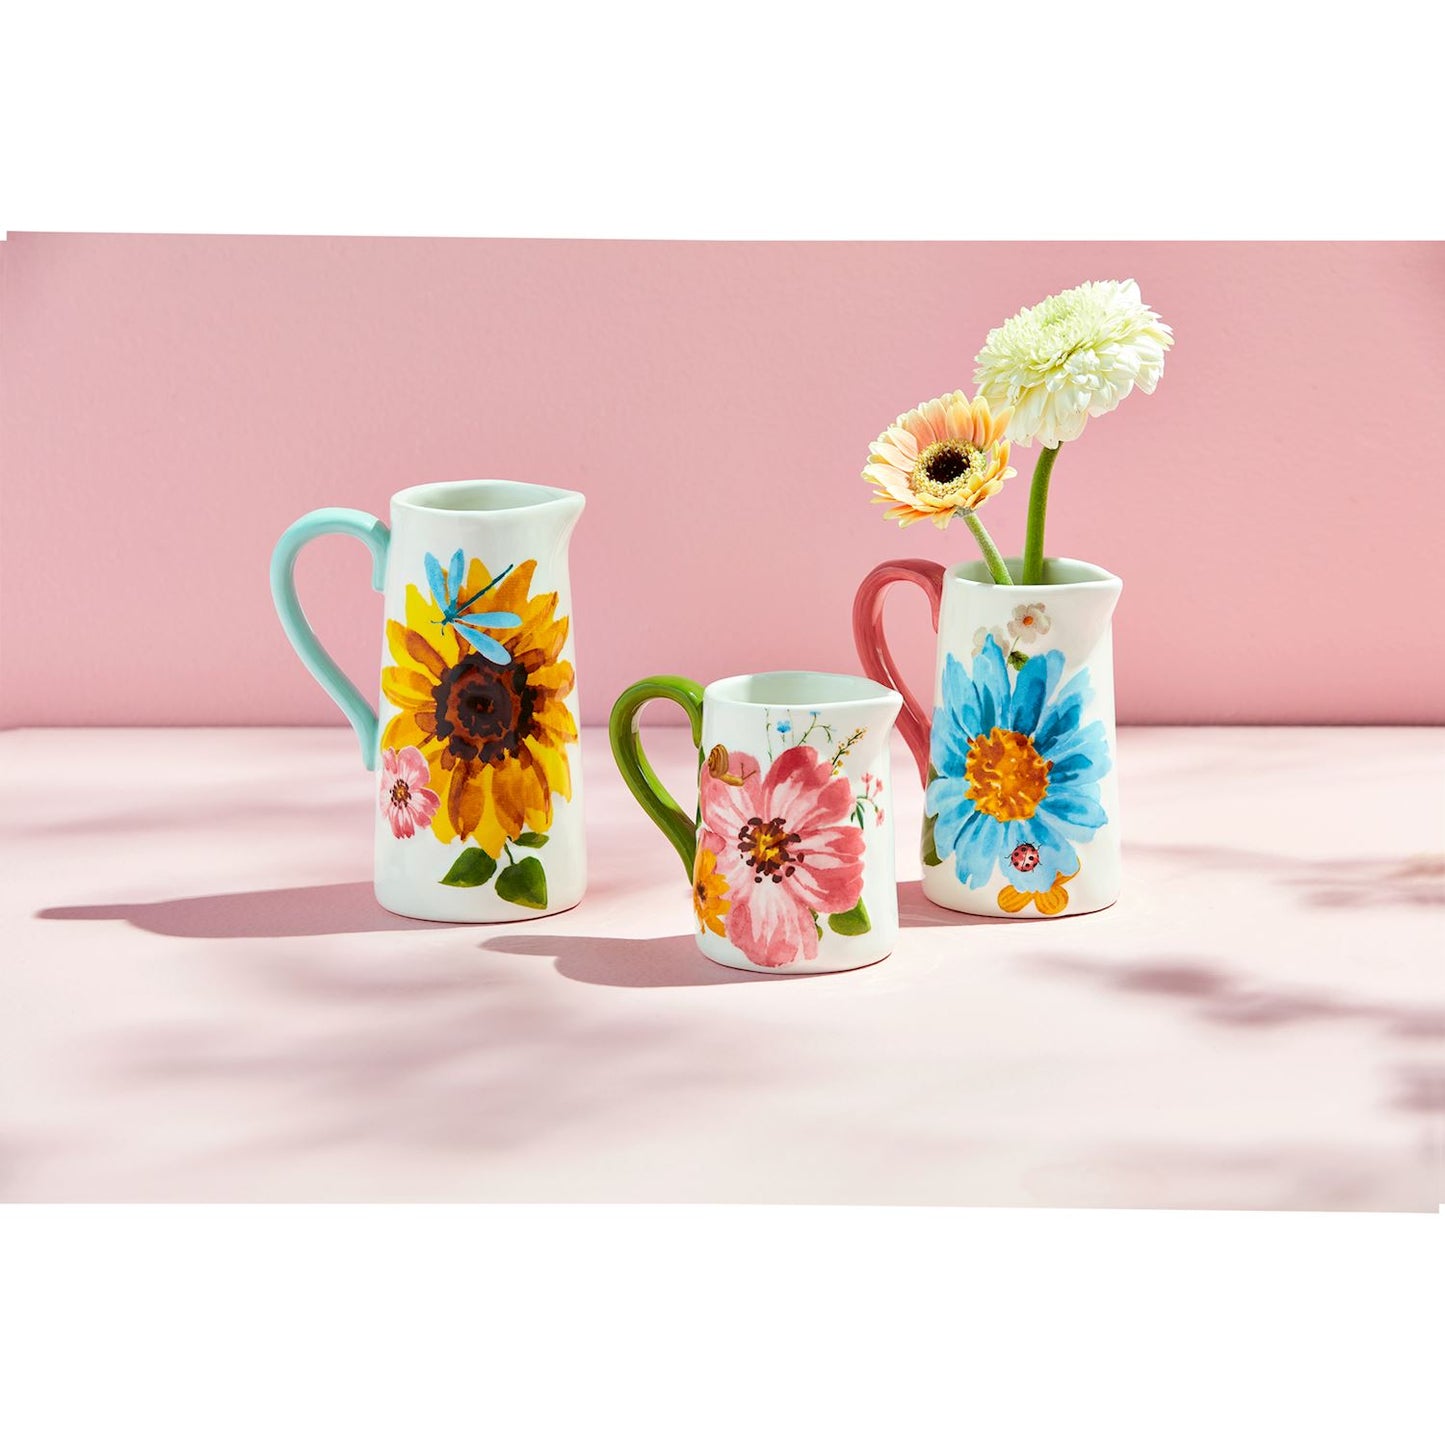 3 styles of floral and bug pitcher vases arranged on a pink background, the medium vase has daisies in it.